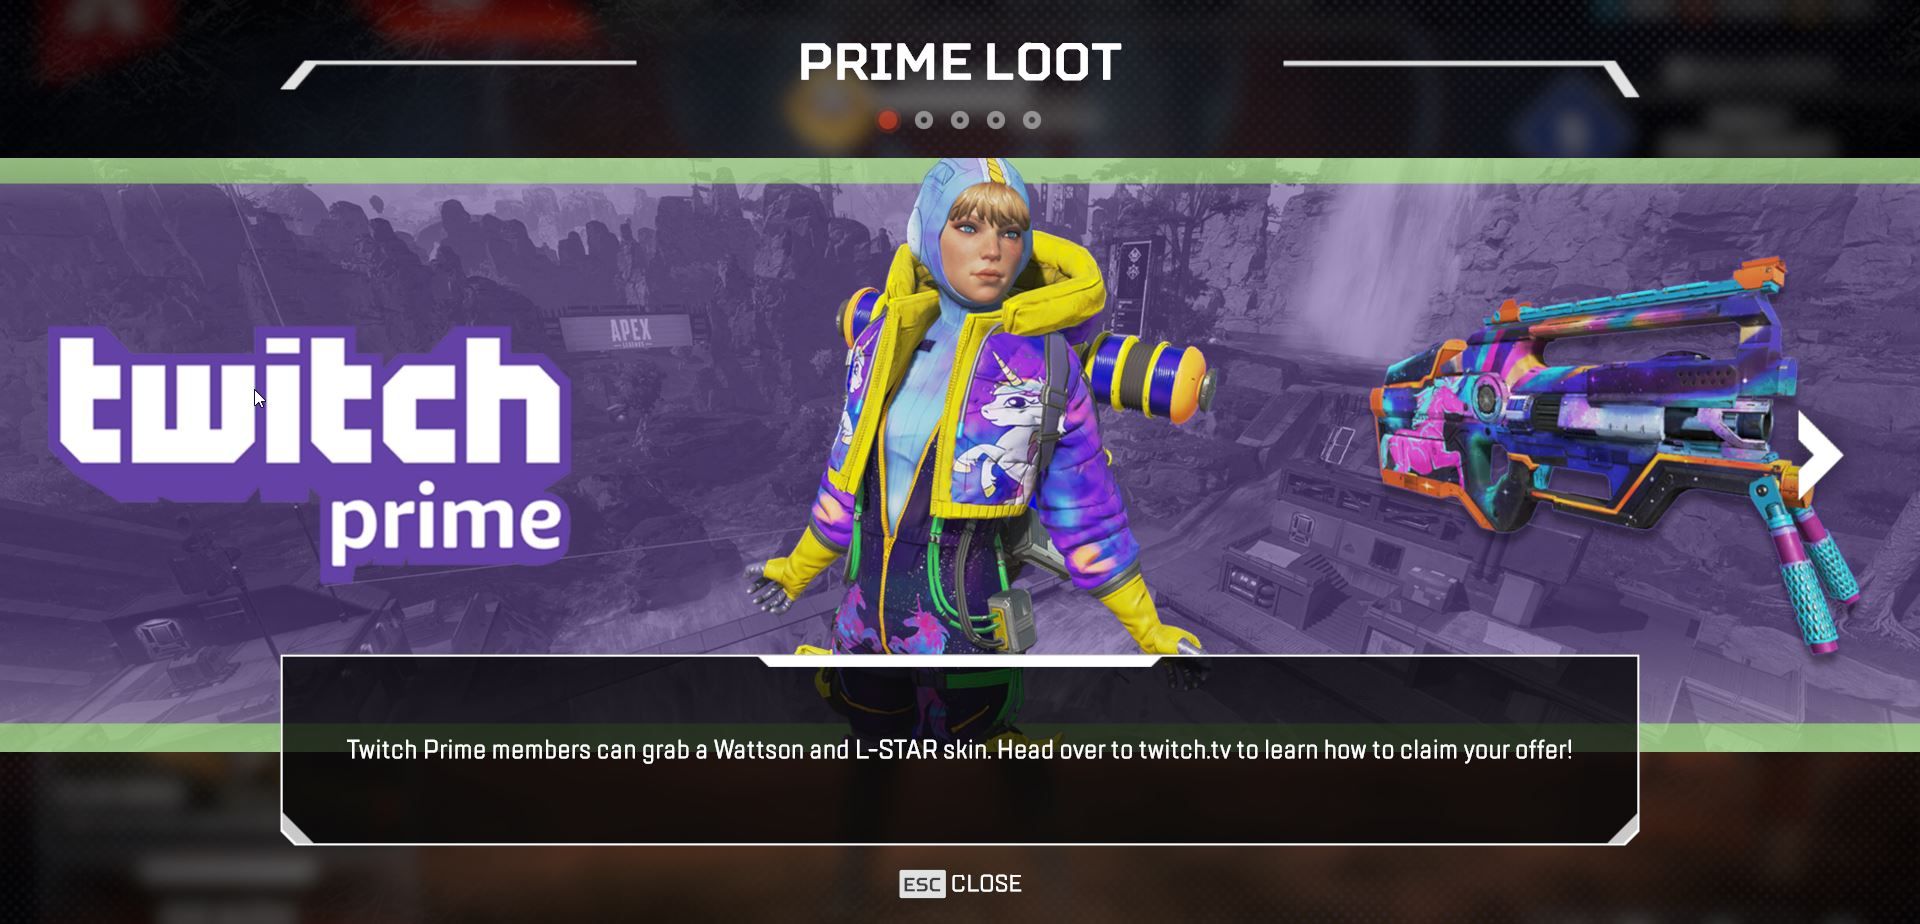 Twitch Prime members get 5 free Apex Legends packs and legendary